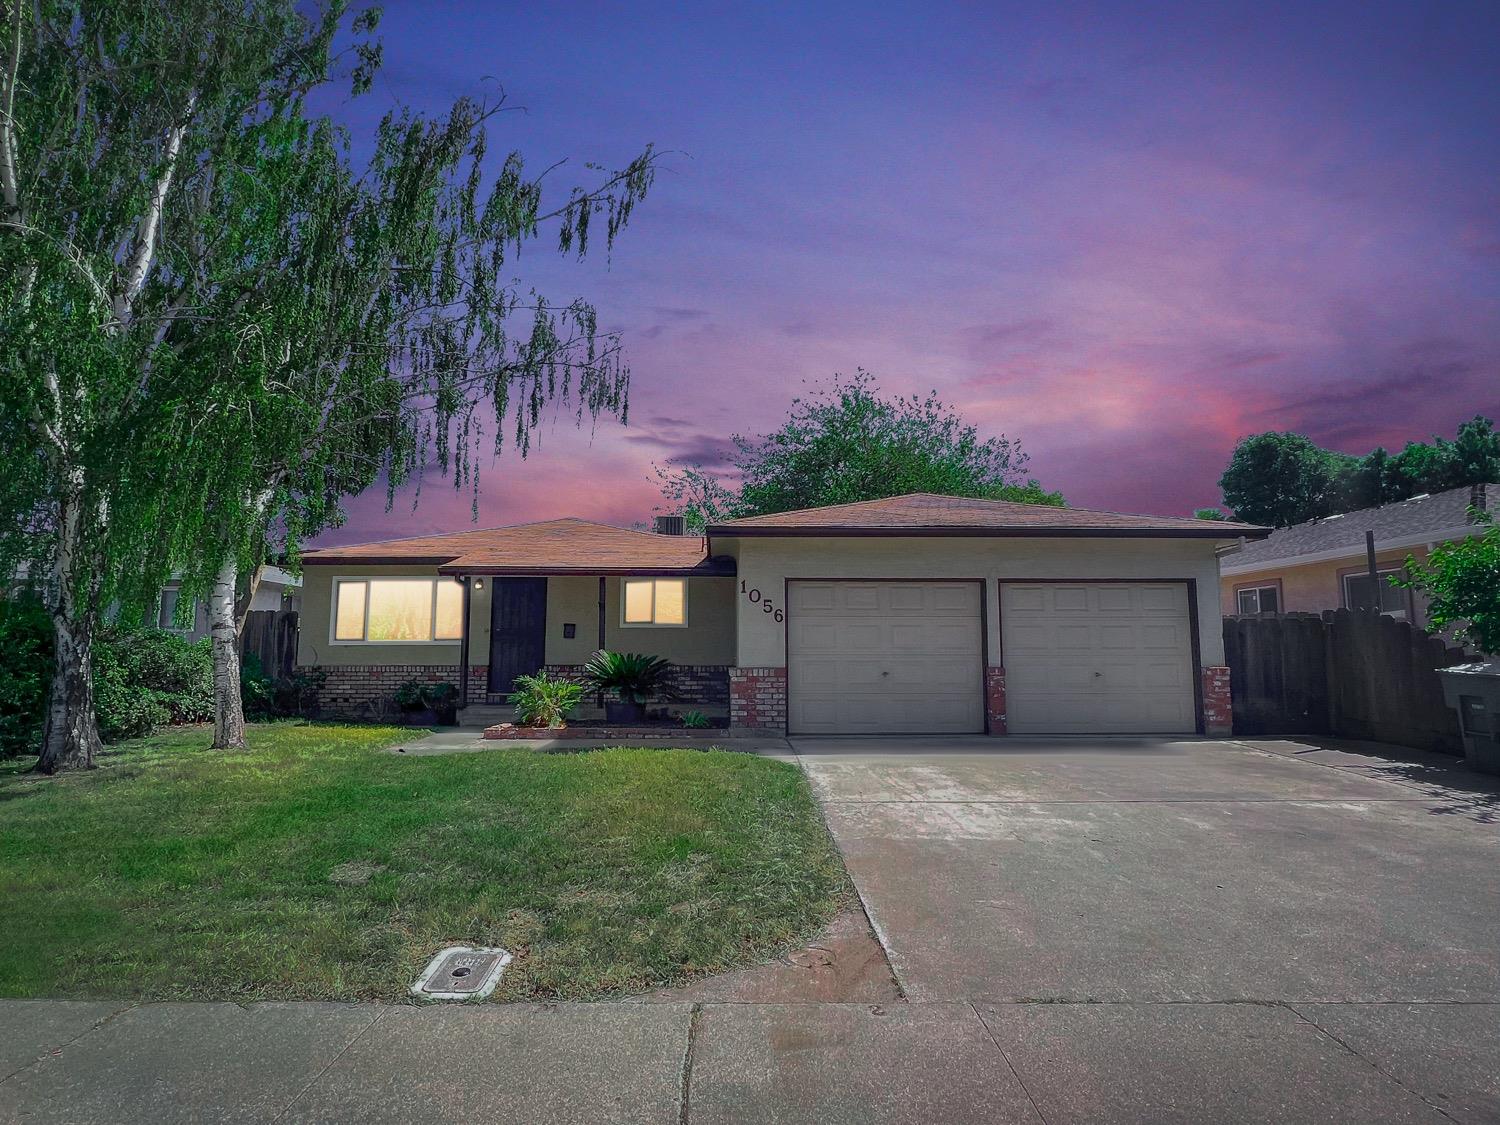 Photo of 1056 Sapphire Wy in Manteca, CA